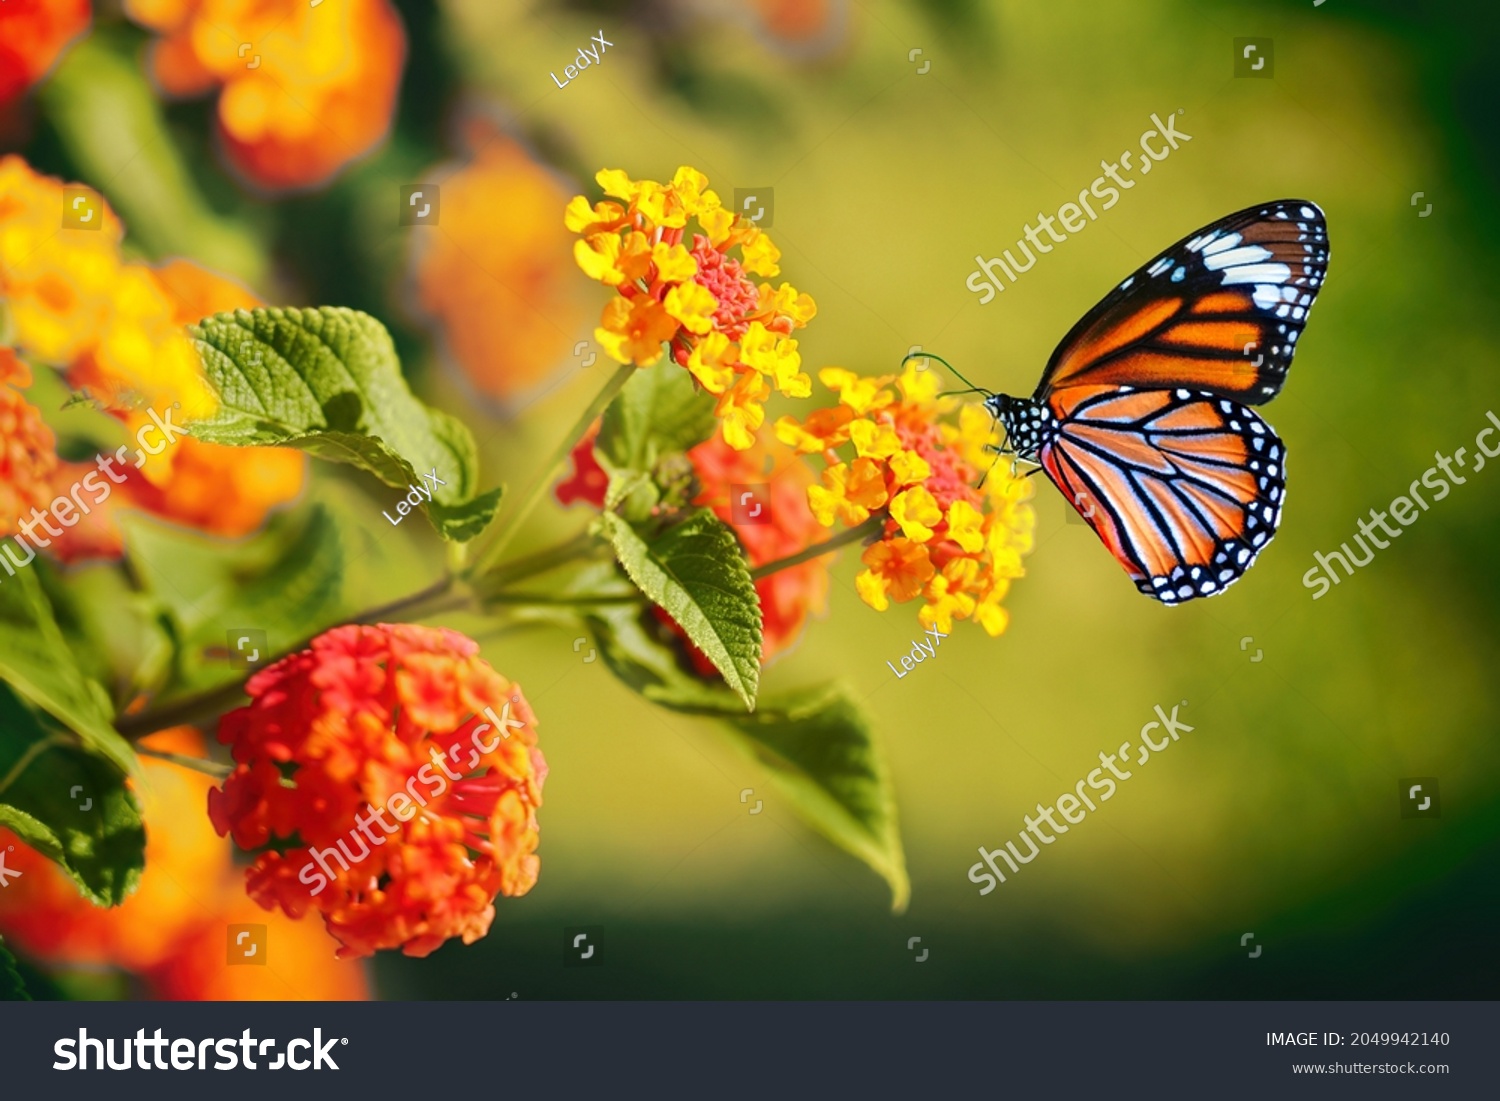 Beautiful image in nature of monarch butterfly on lantana flower. #2049942140